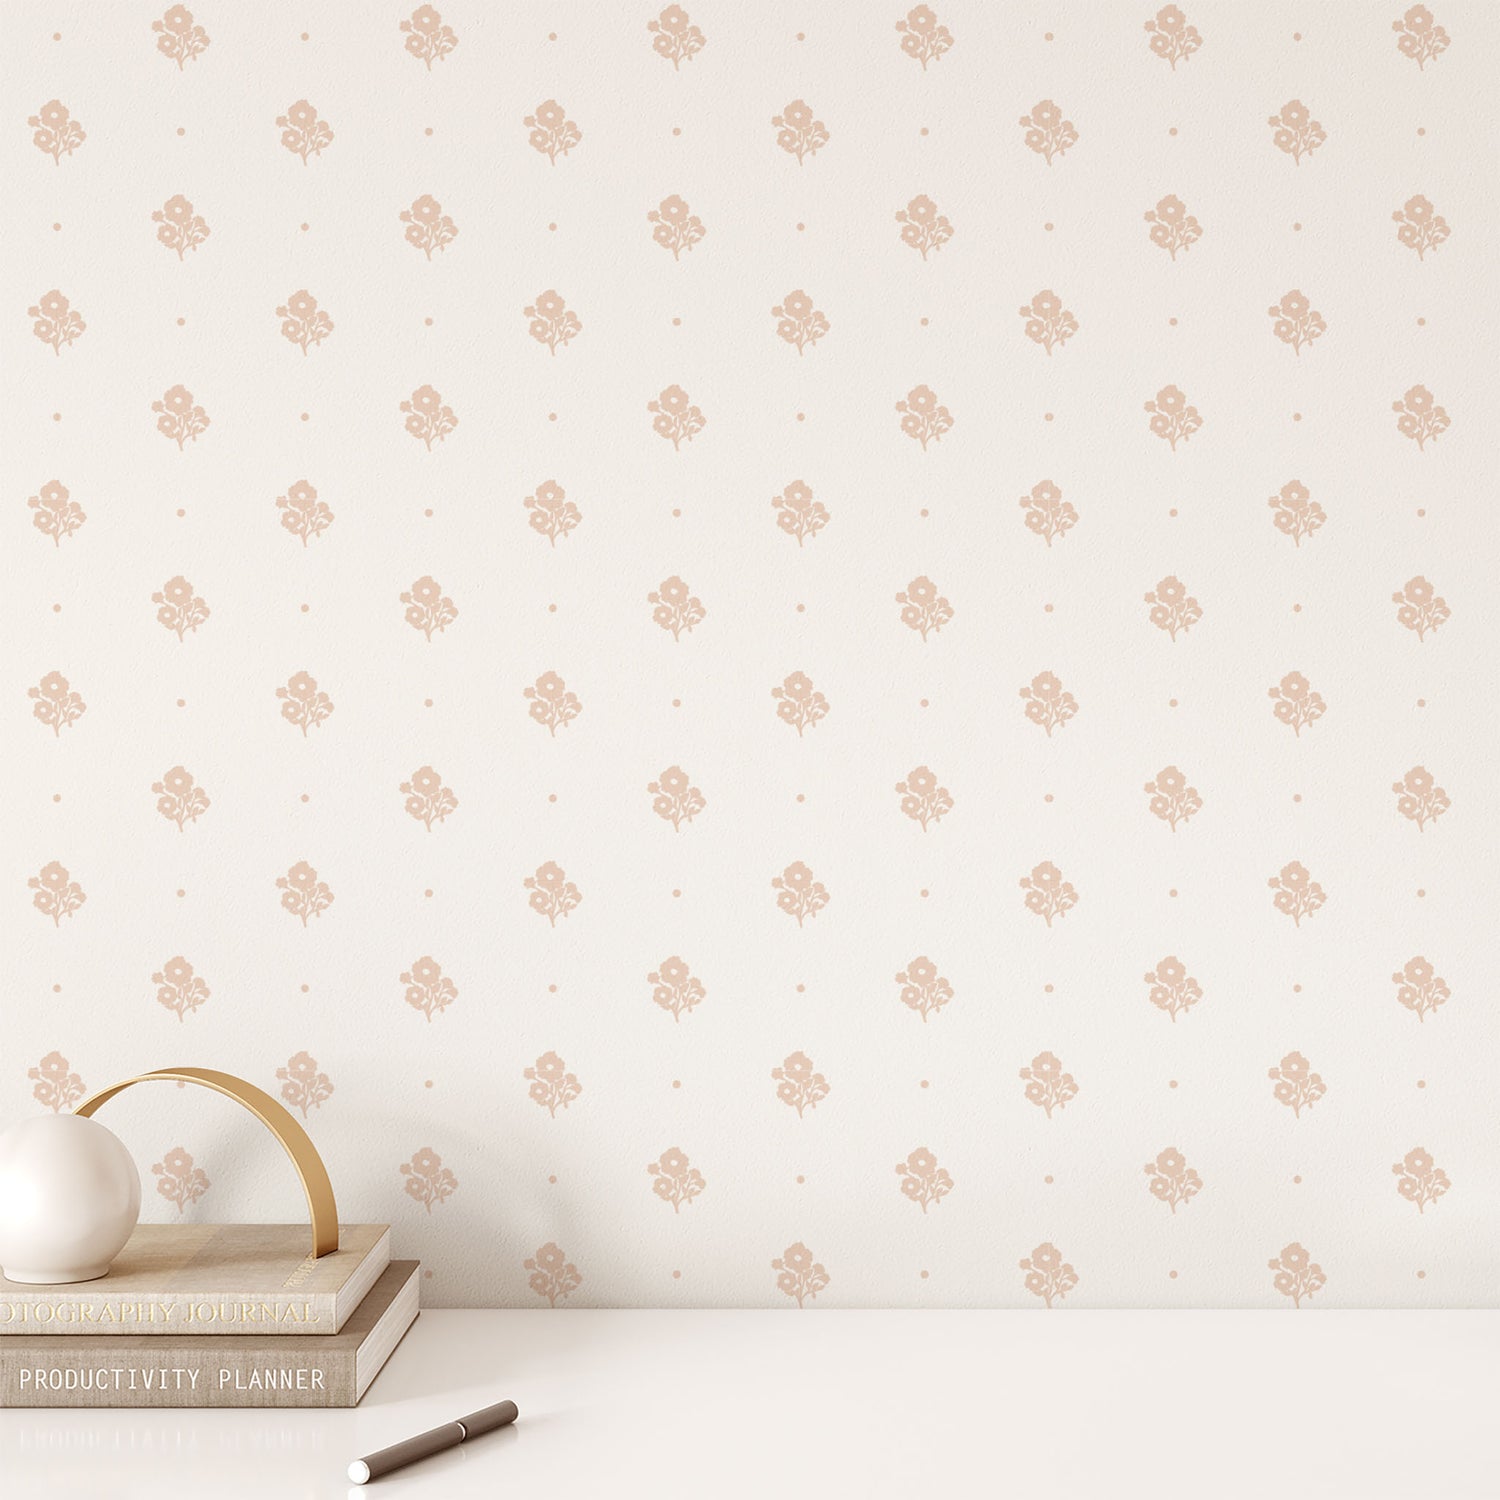 Elevate your home decor with our Cambridge Wallpaper in a sophisticated peach shown in full size image.